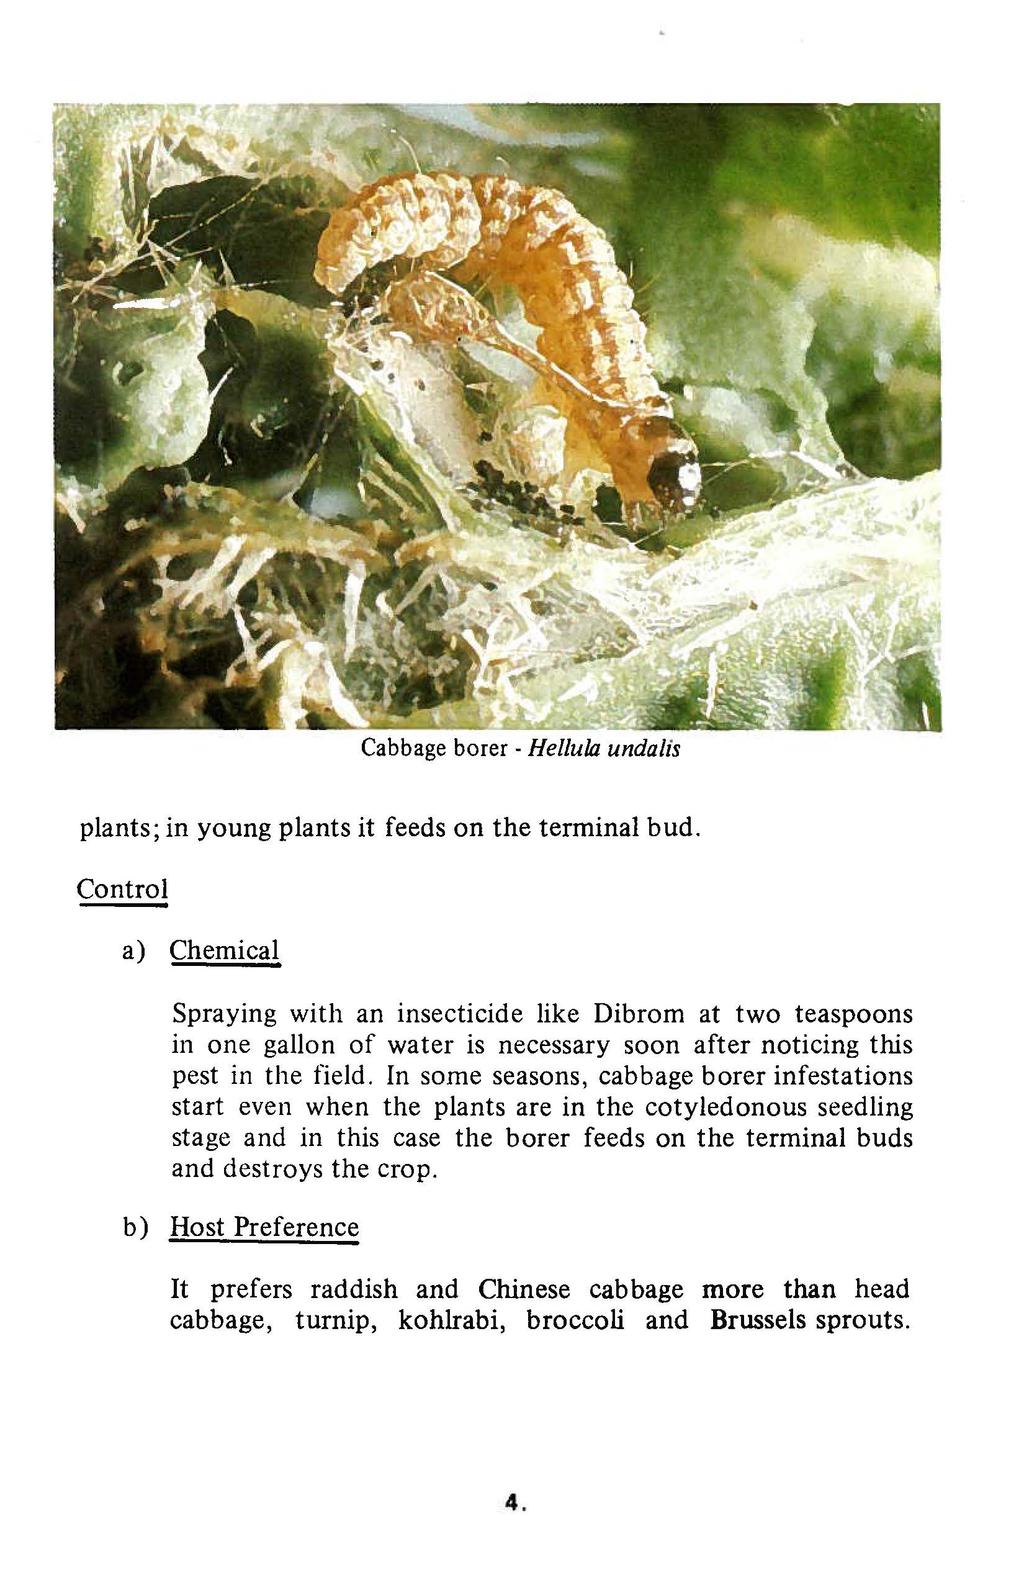 Cabbage borer - Hellula undalis plants; in young plants it feeds on the terminal bud.